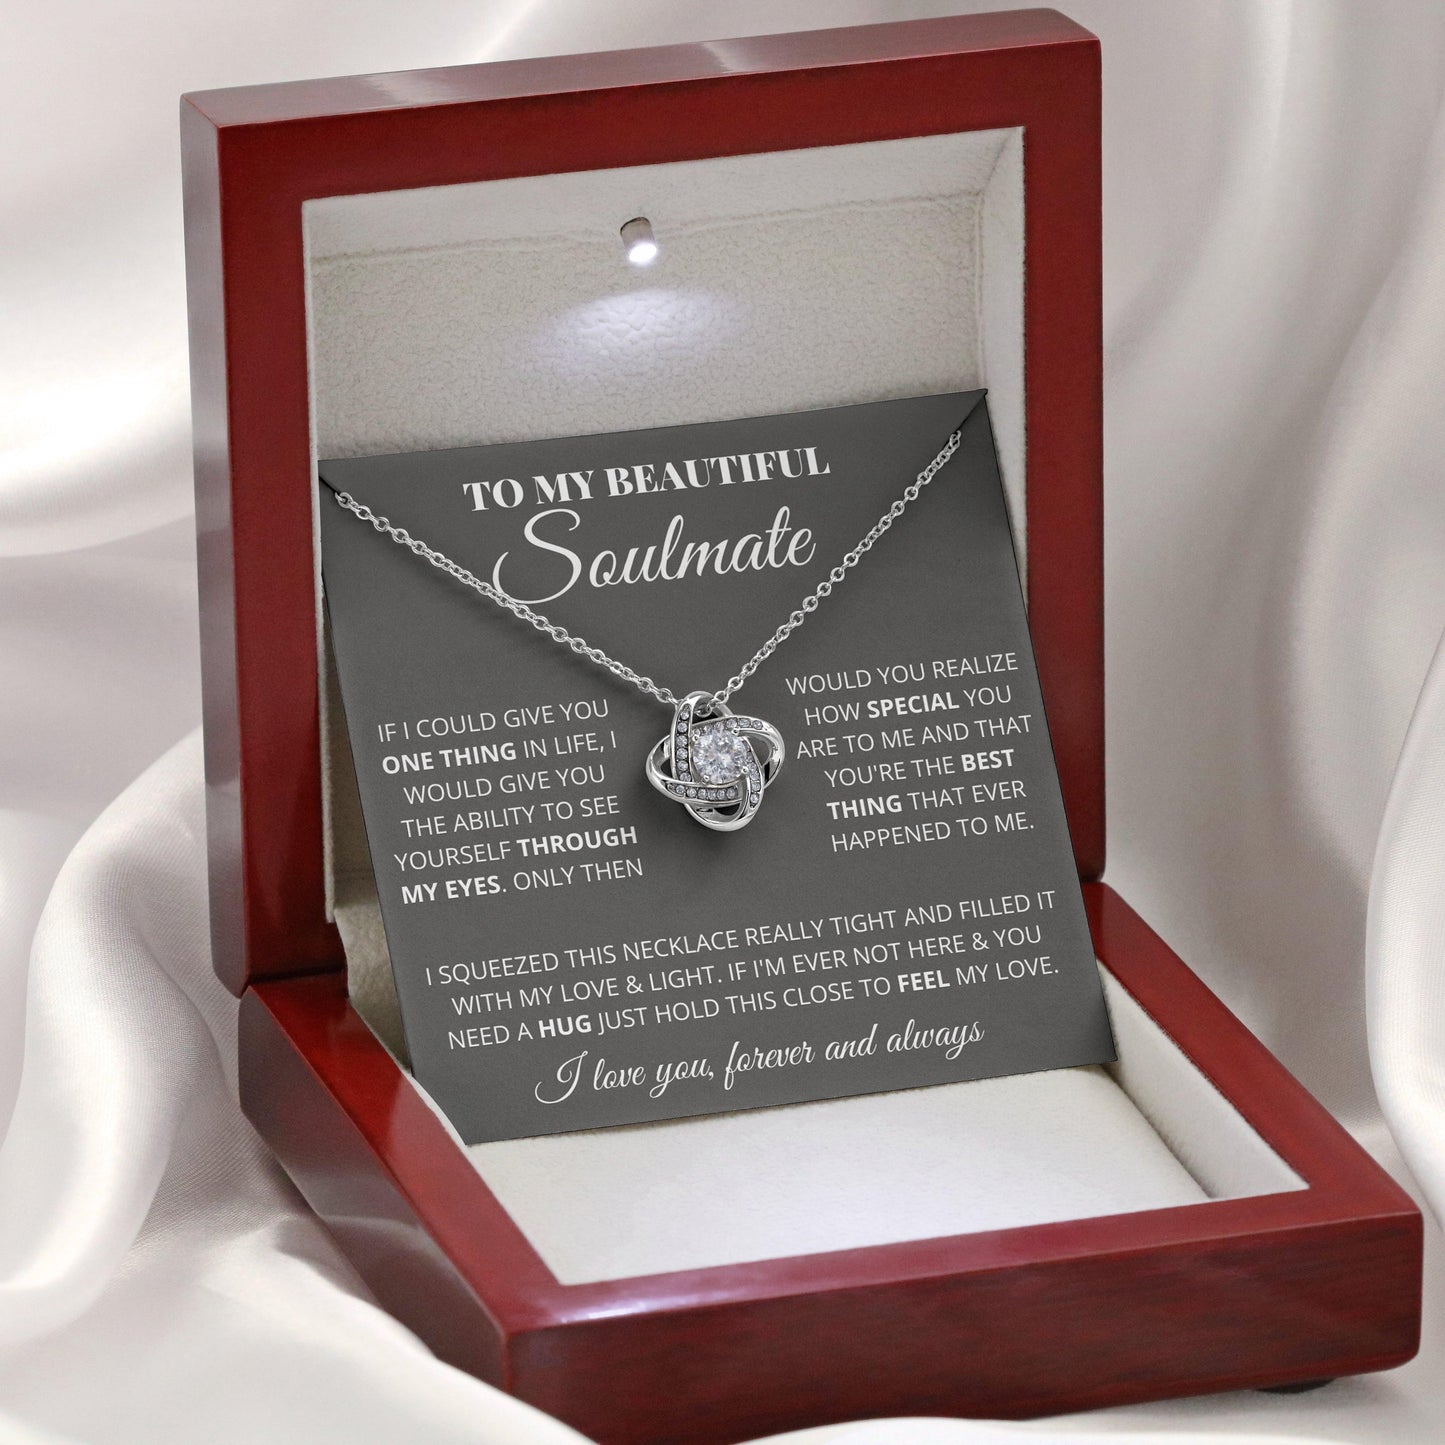 Jewelry gifts Soulmate - My Life My Everything - Necklace - Belesmé - Memorable Jewelry Gifts